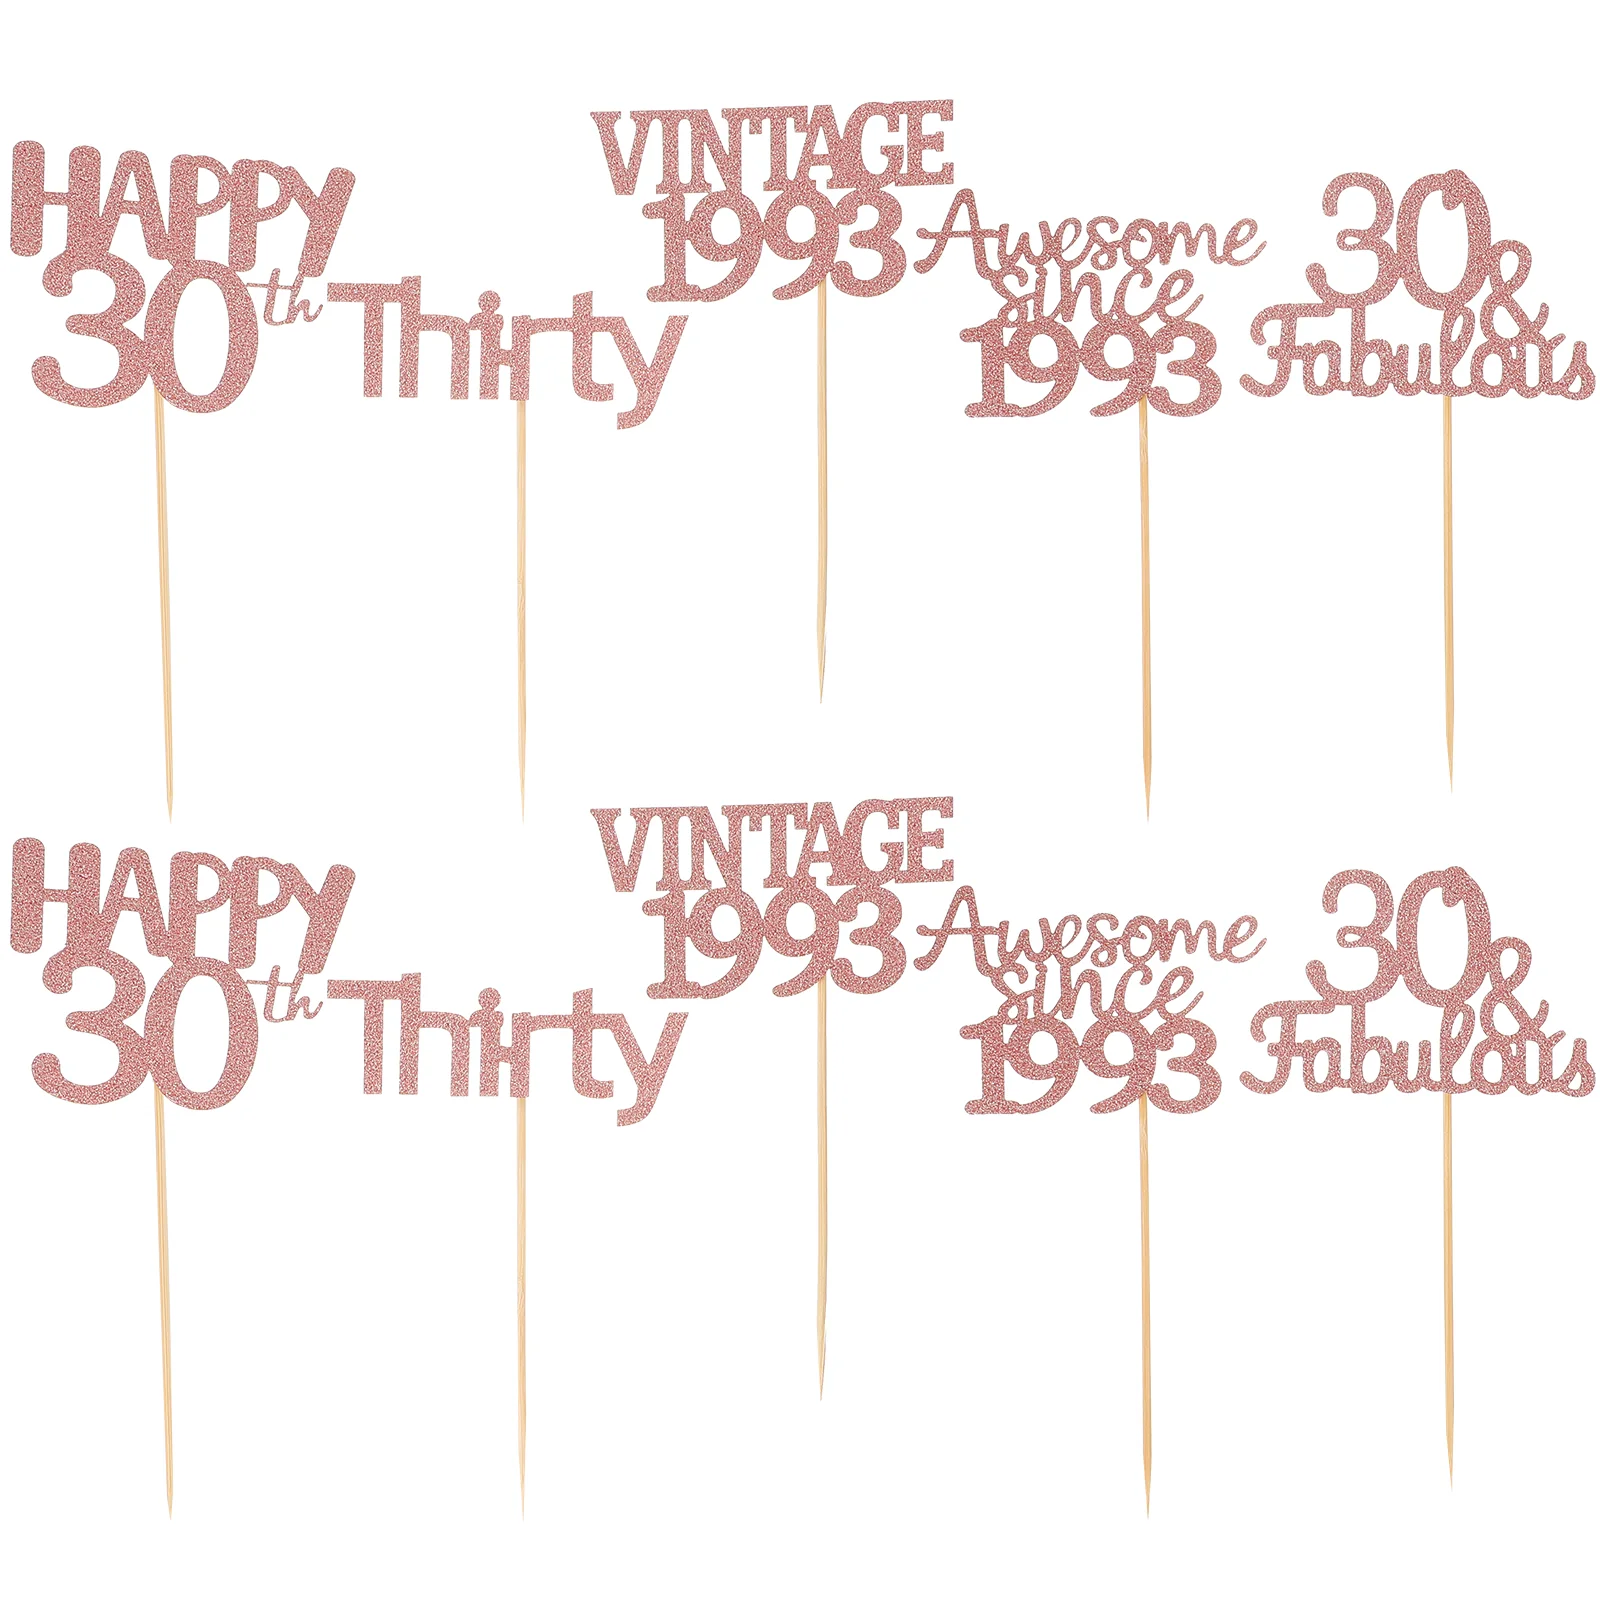 

30pcs 30th Birthday Cupcakes Toppers 1993 Cupcake Picks Cake Decorations Party Supplies